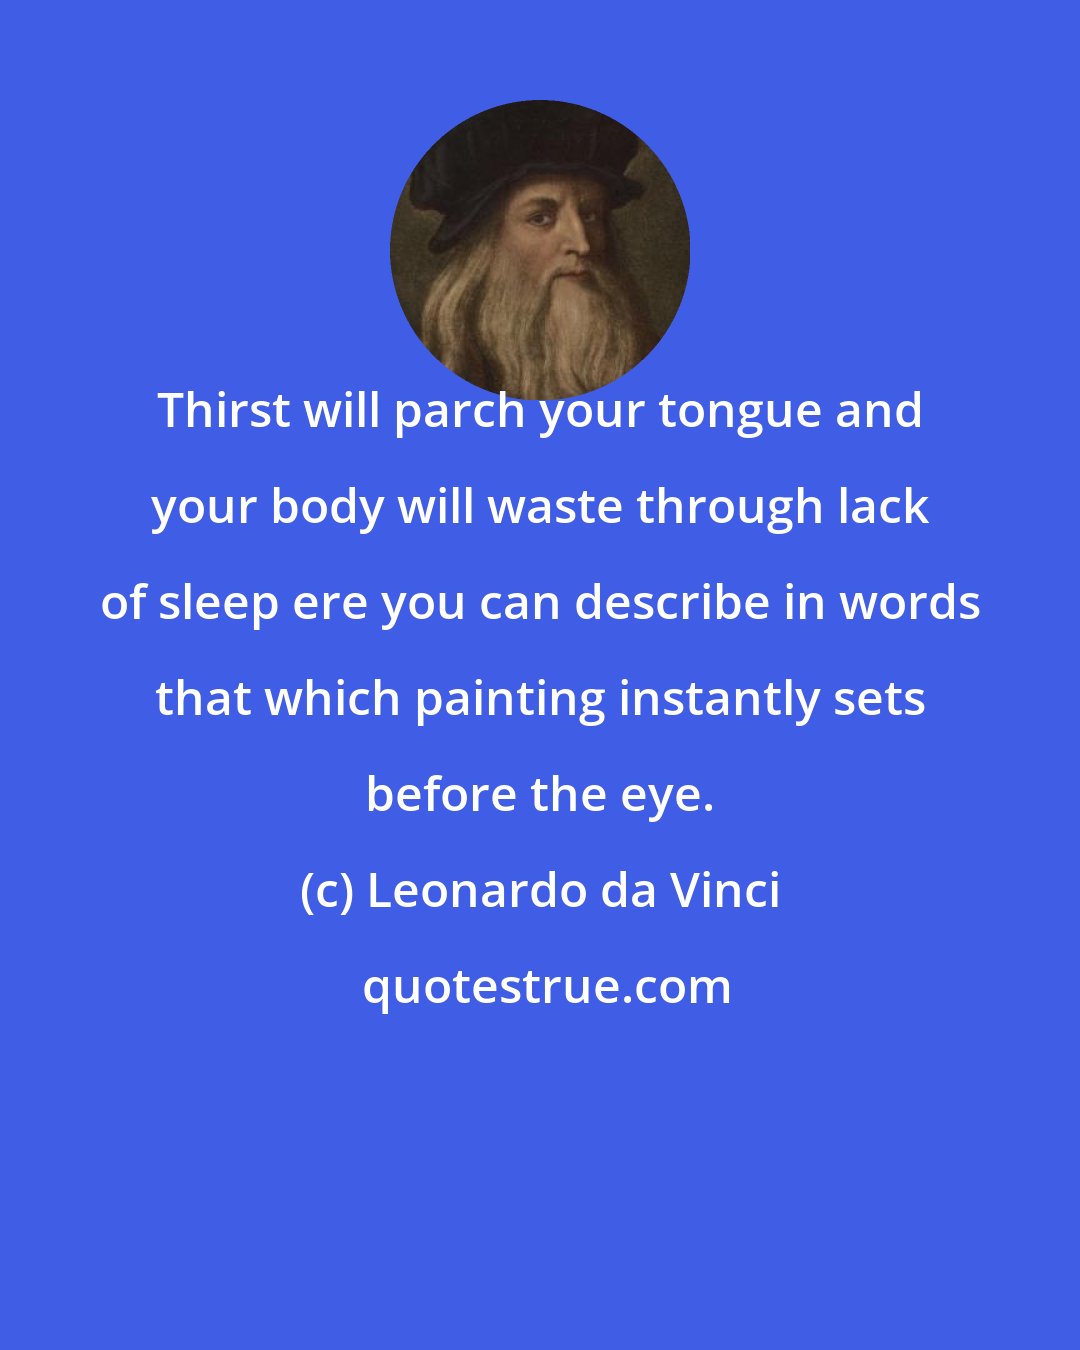 Leonardo da Vinci: Thirst will parch your tongue and your body will waste through lack of sleep ere you can describe in words that which painting instantly sets before the eye.